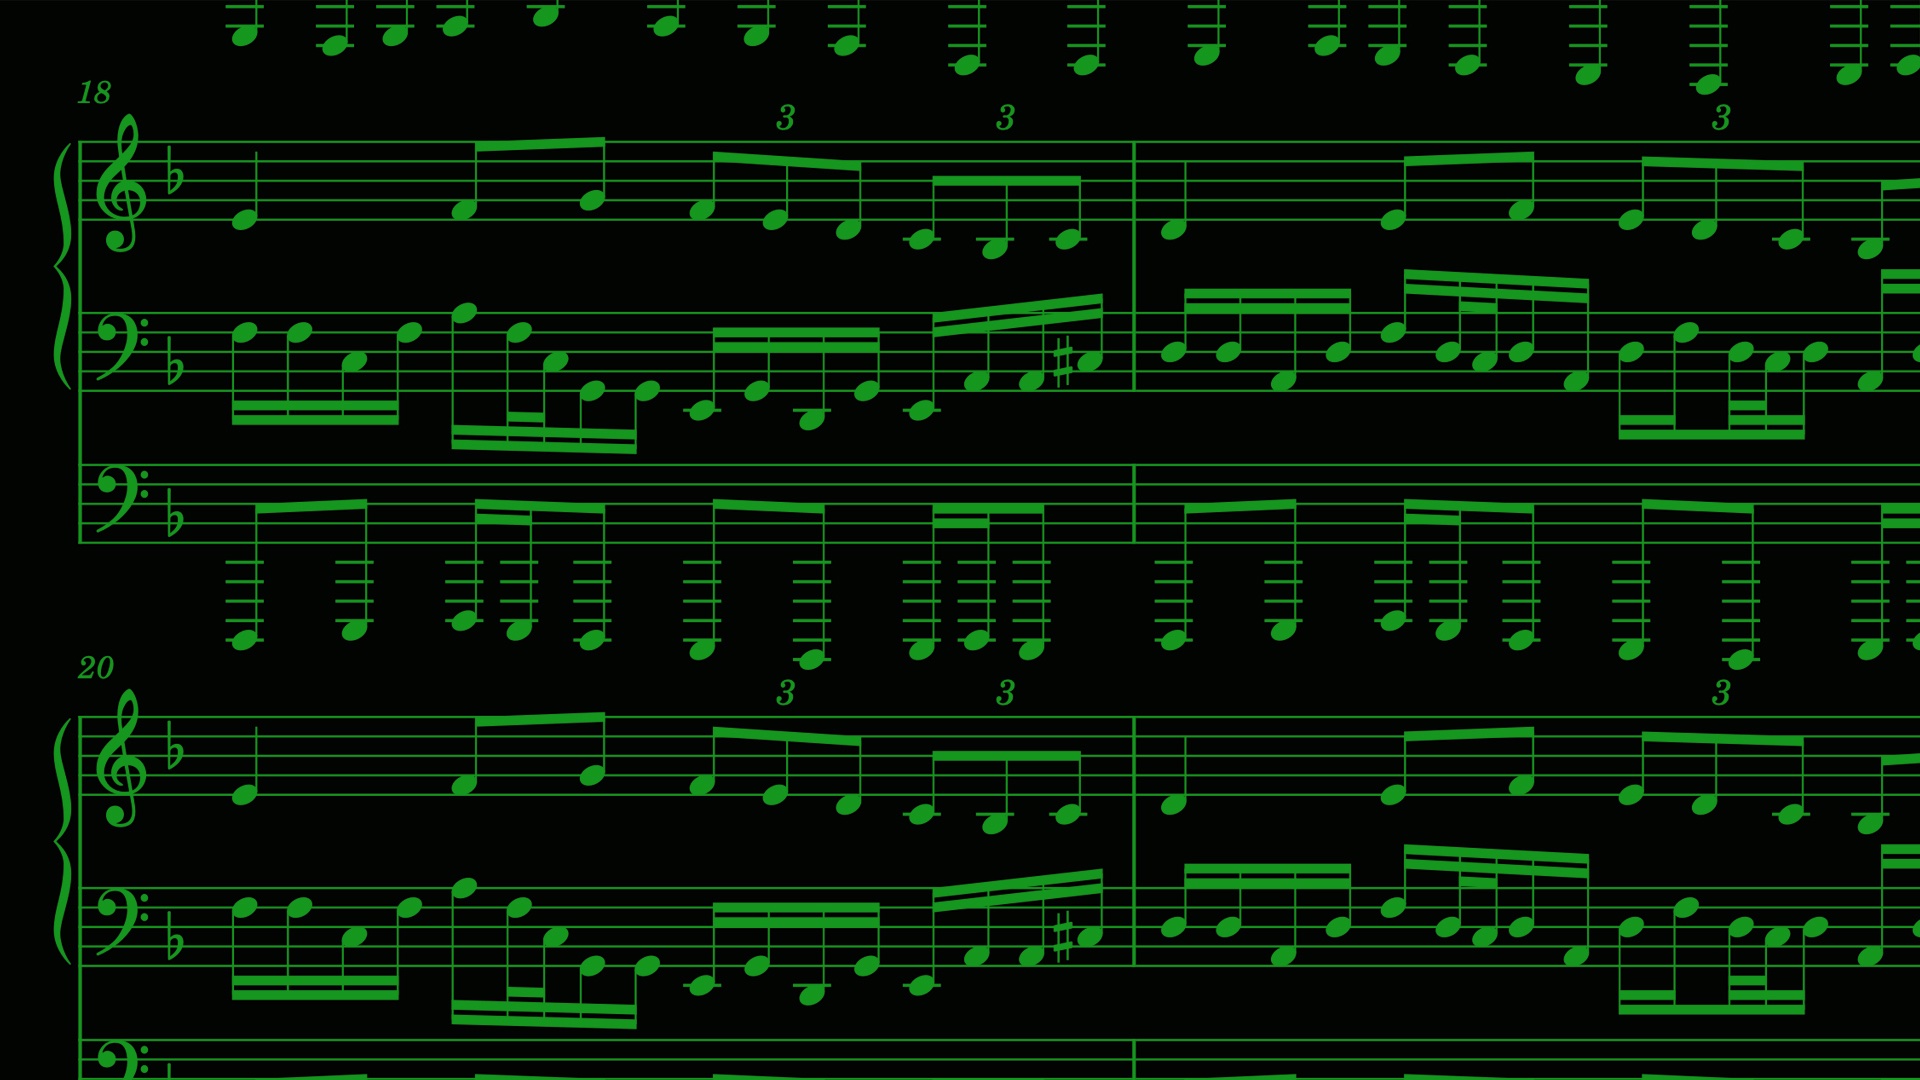 Several lines of sheet music. The music is in bright green, on a black background.